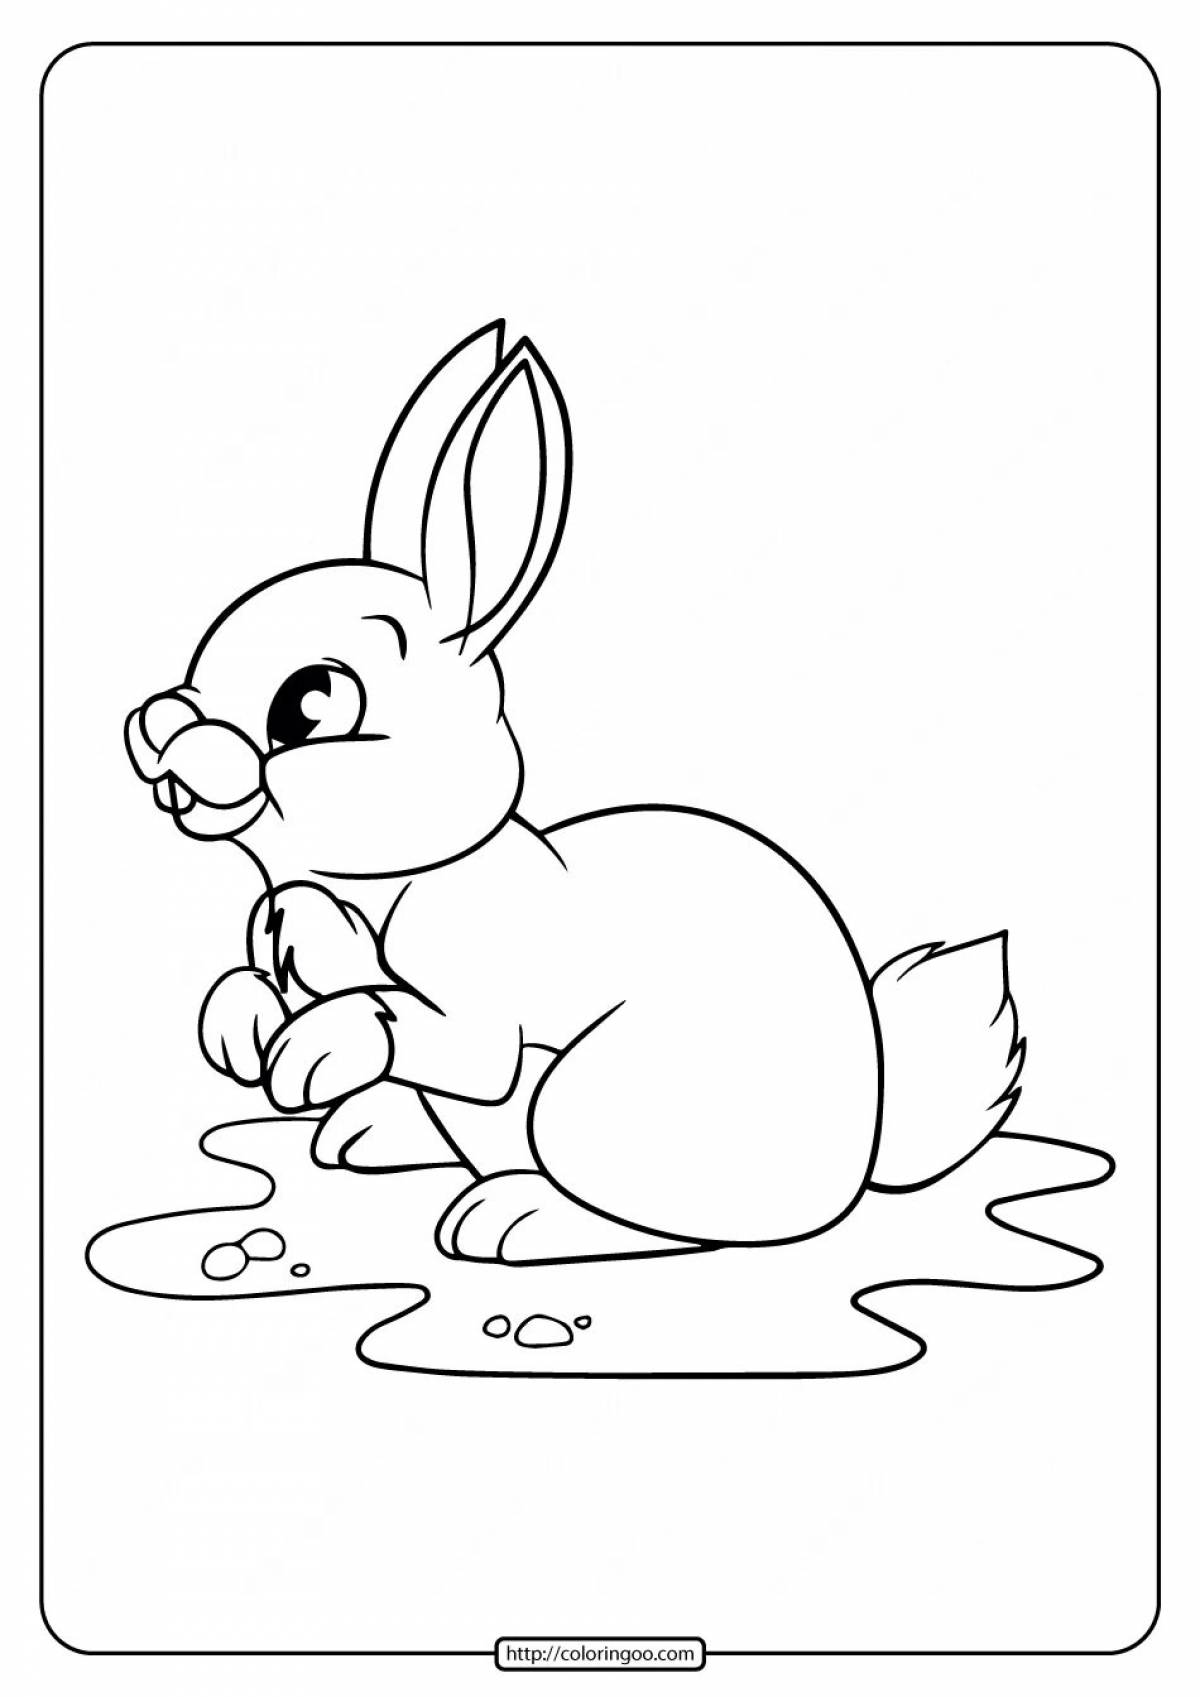 Incredible hare and squirrel coloring book